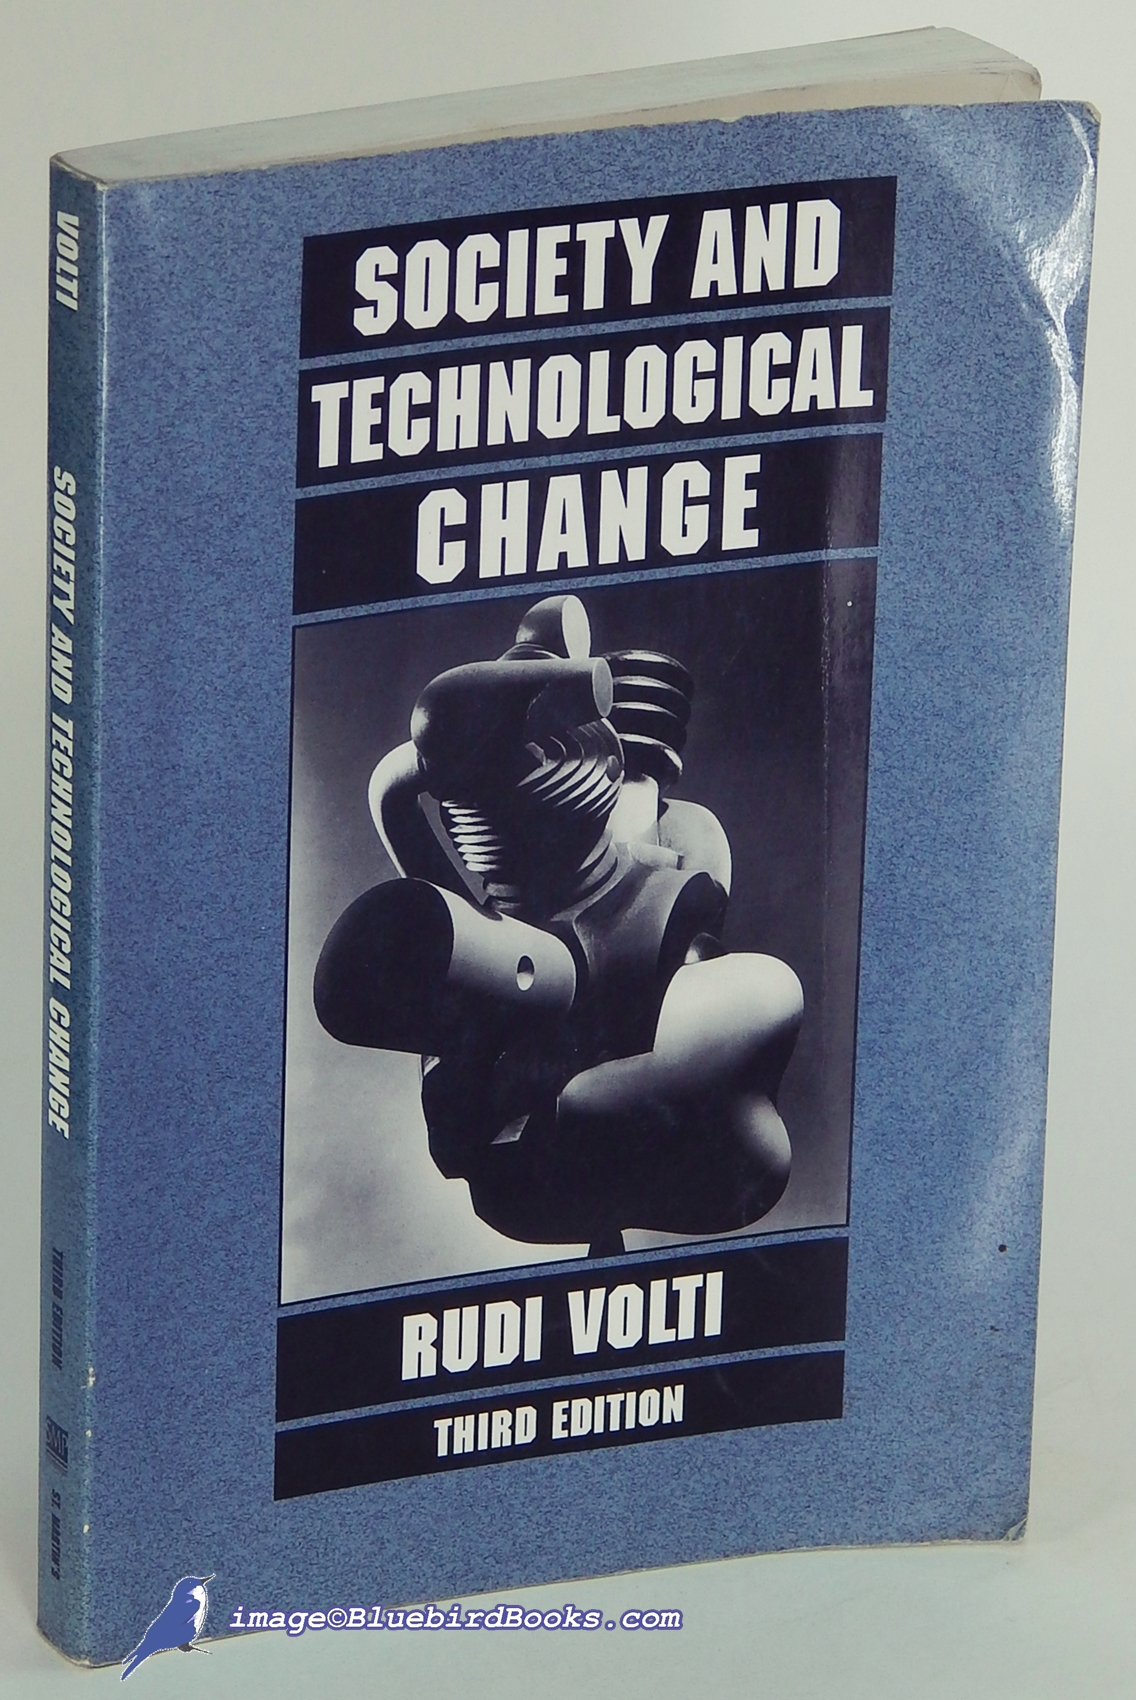 VOLTI, RUDI - Society and Technological Change (Third Edition)